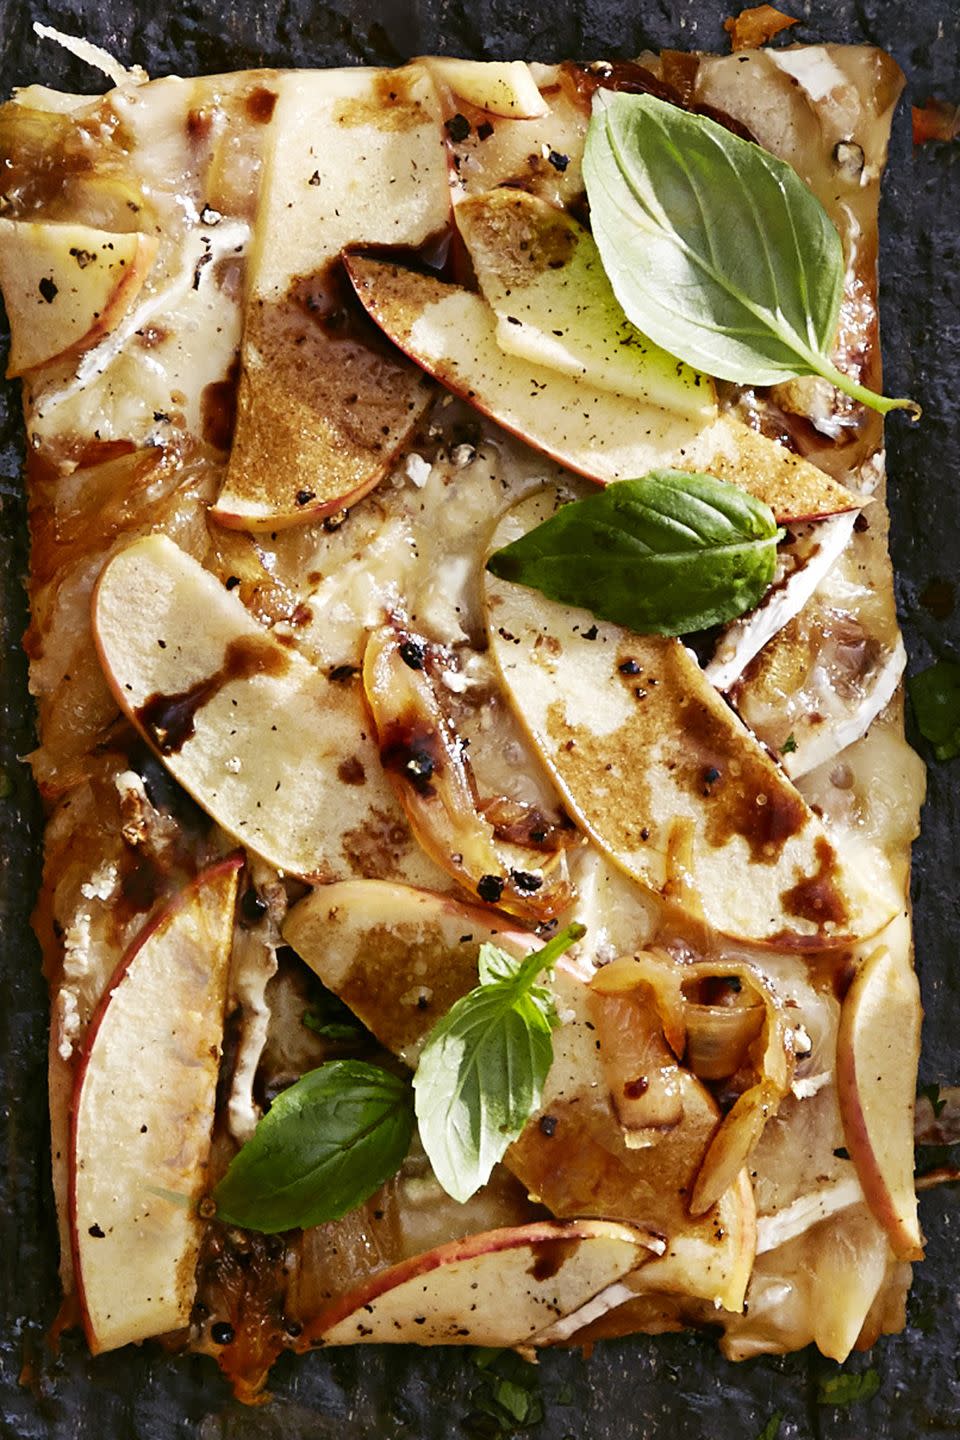 Apple-Brie Pizza With Caramelized Onions